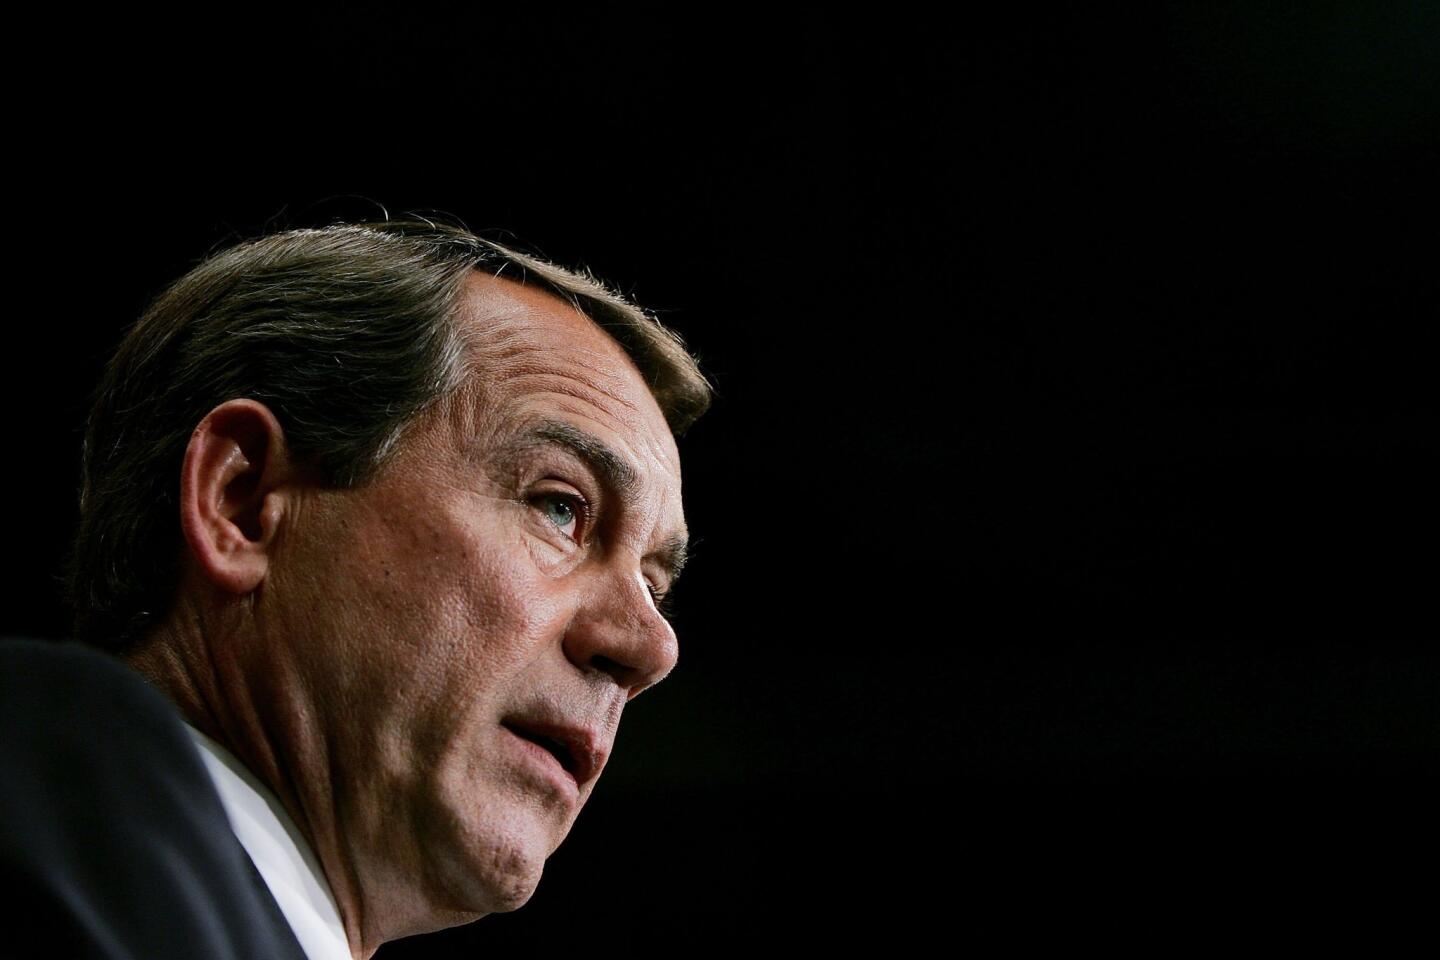 House Majority Leader Rep. John Boehner answers questions during a news conference at the U.S. Capitol in 2006. Boehner plans to step down from his post and leave Congress at the end of October.